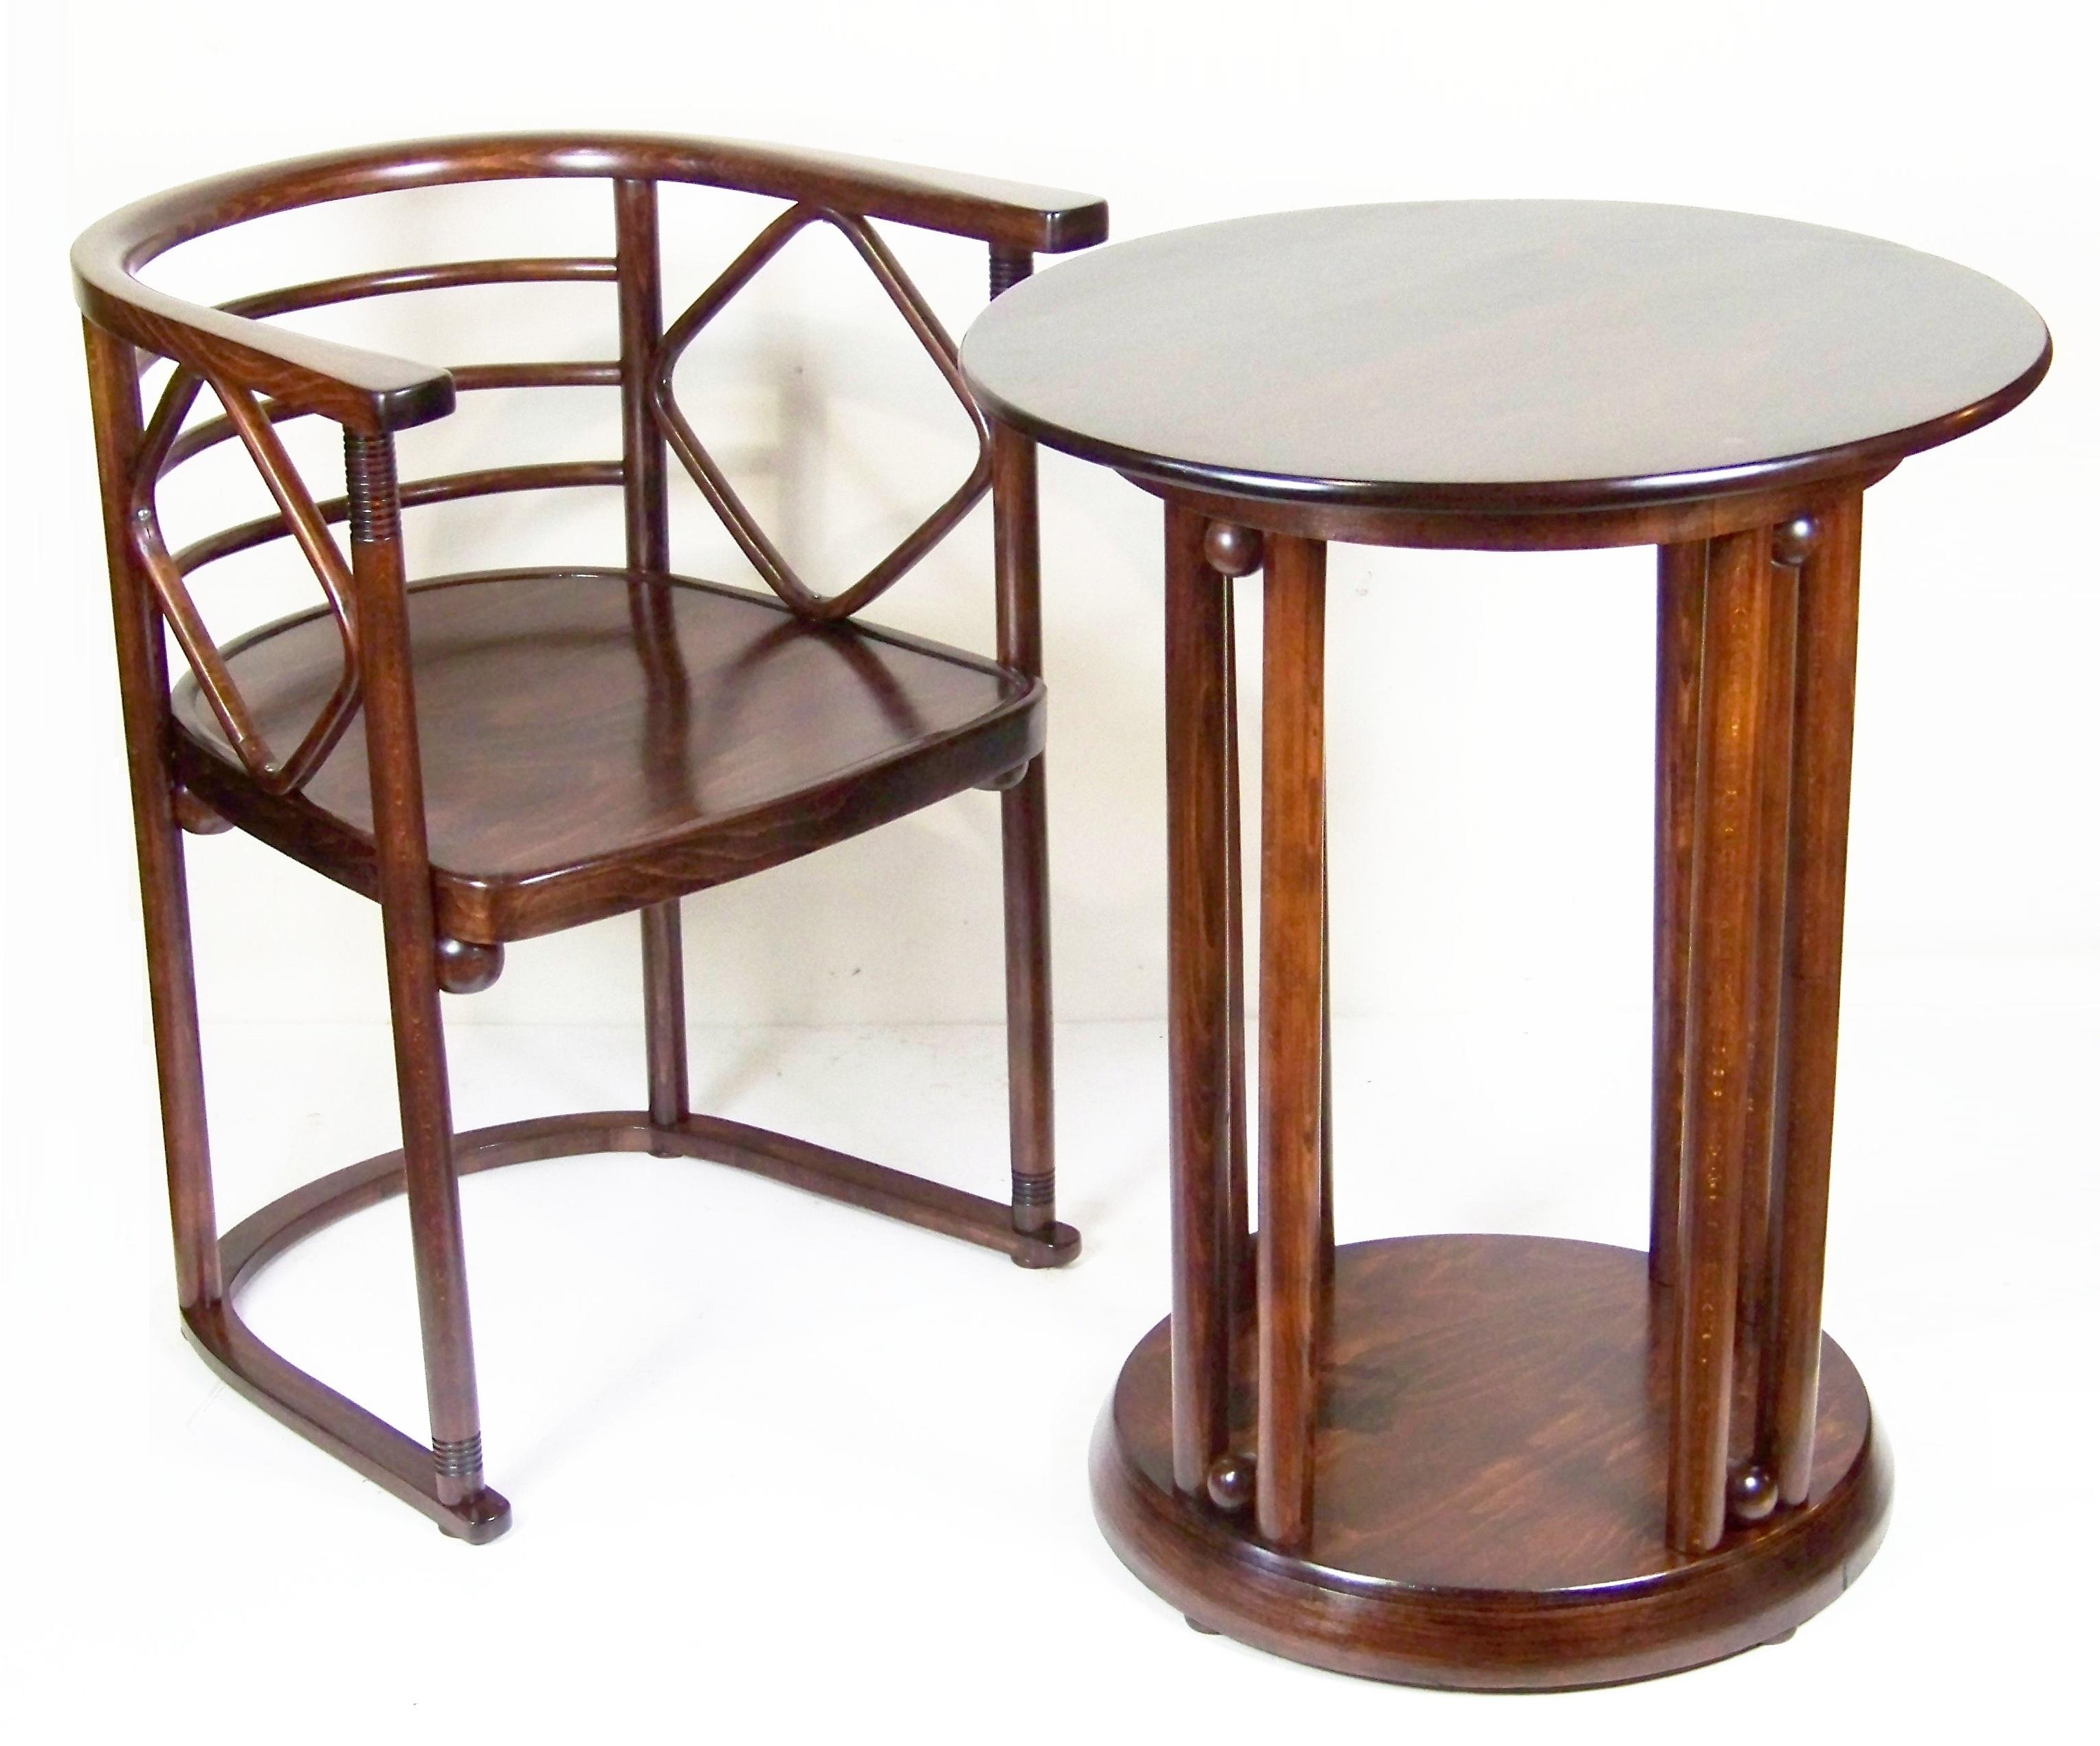 This amazing design was renowned by Josef Hoffmann in year 1907, using in the famous Viennese café Fledermaus. These design was appeared by J&J Kohn company in year 1905. 

Newly restored (handmade shellack finish).

Table dimensions: diameter